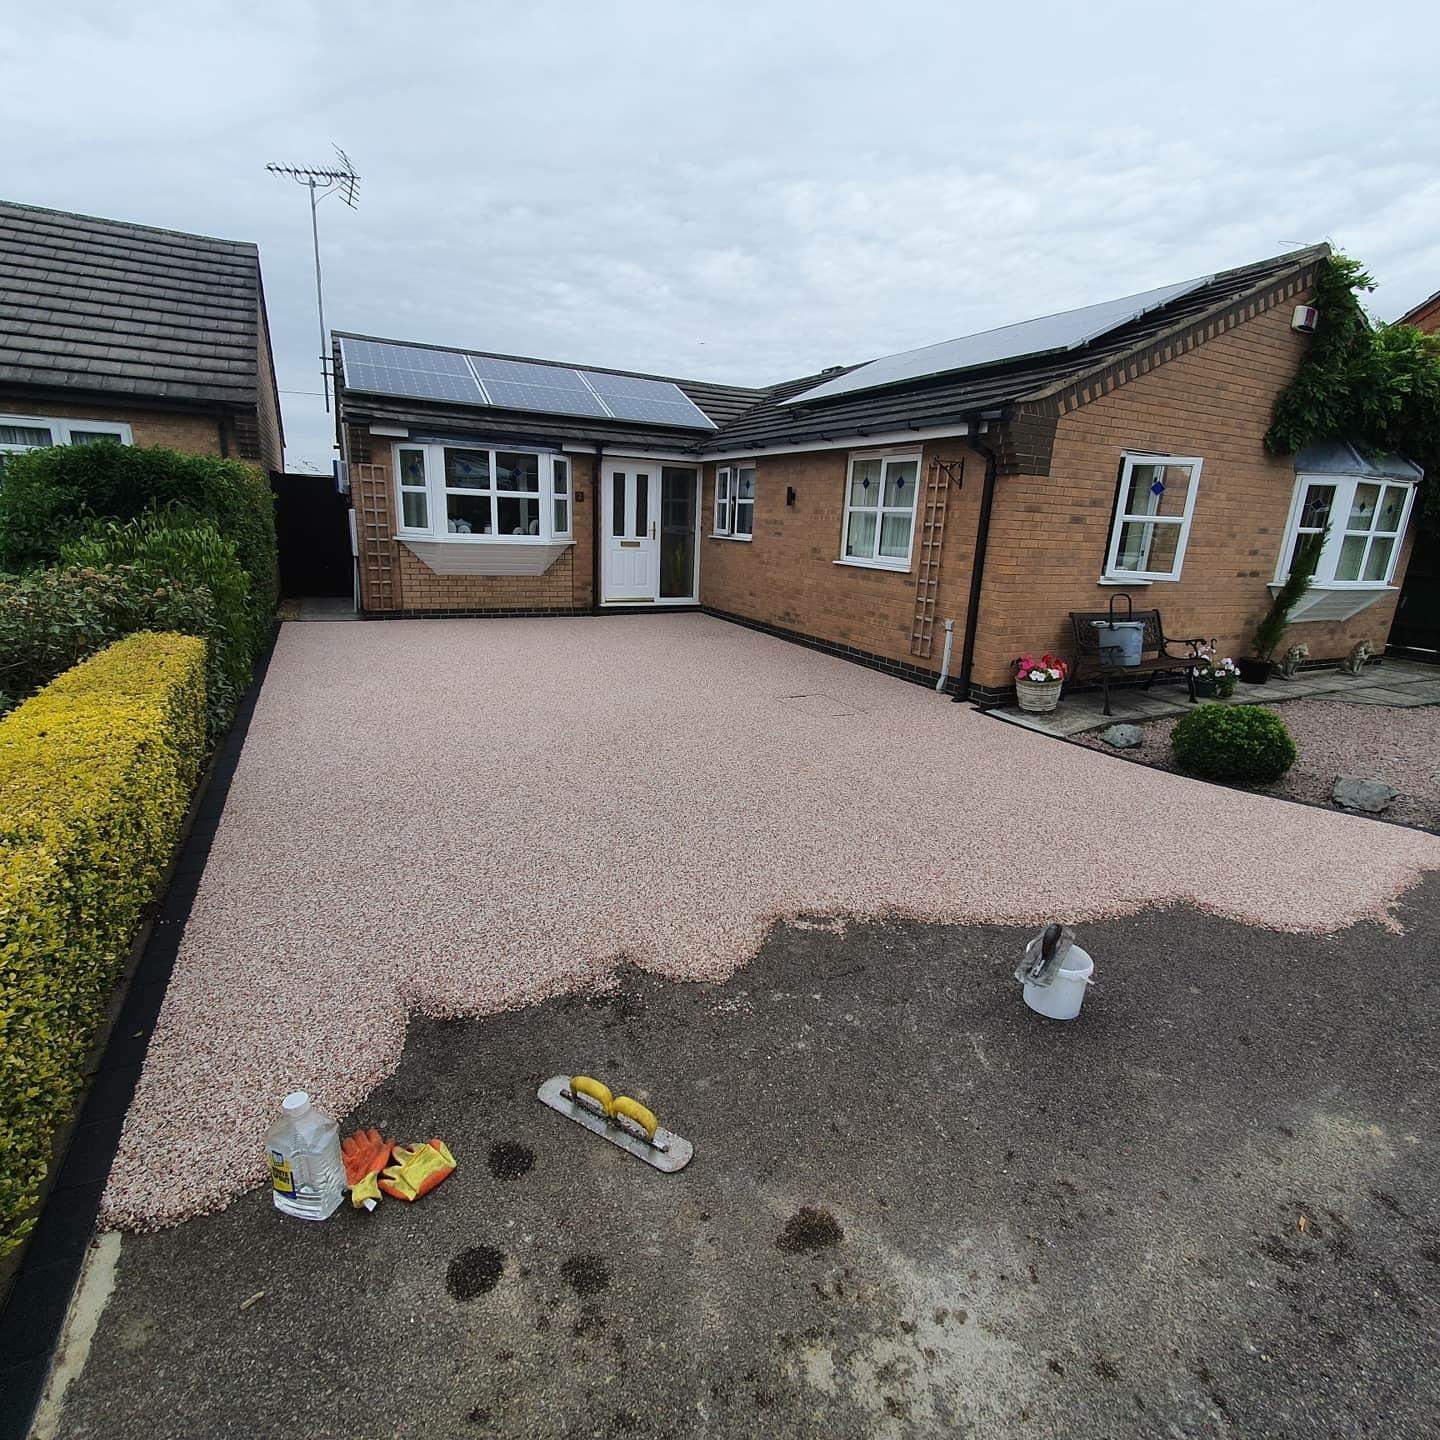 Resin Bound Driveway being completed in Newborough